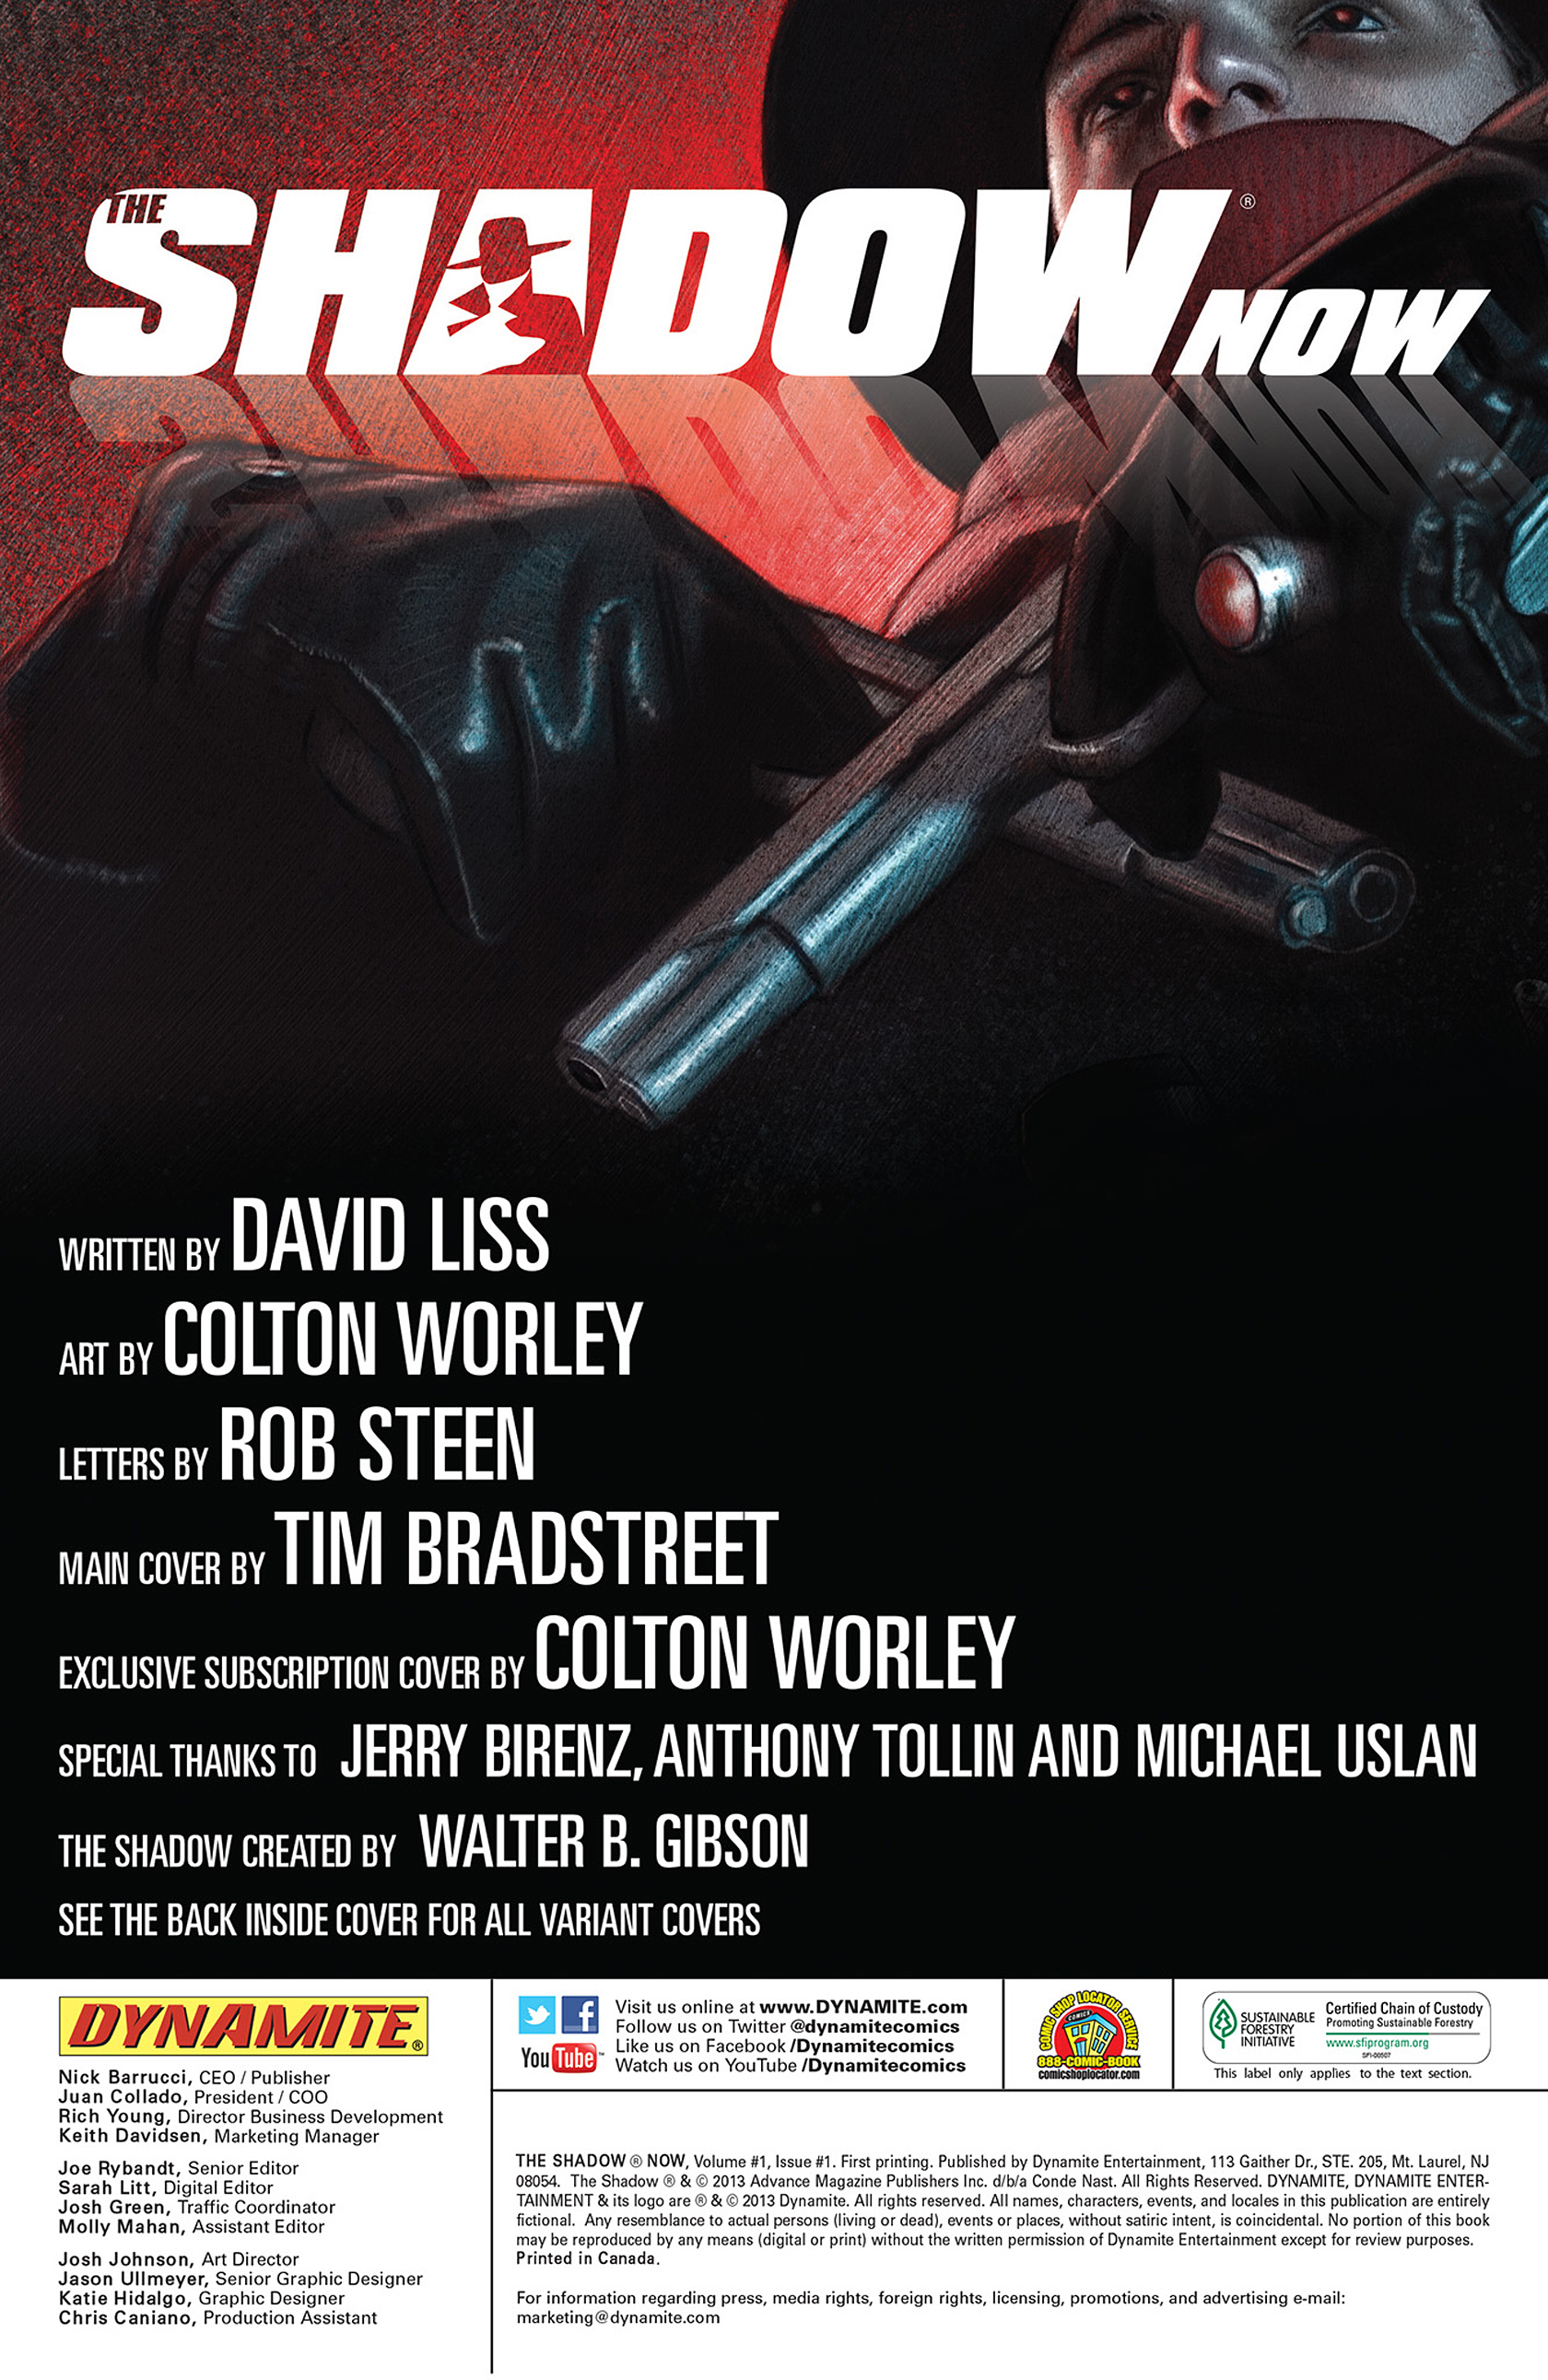 Read online The Shadow Now comic -  Issue #1 - 2